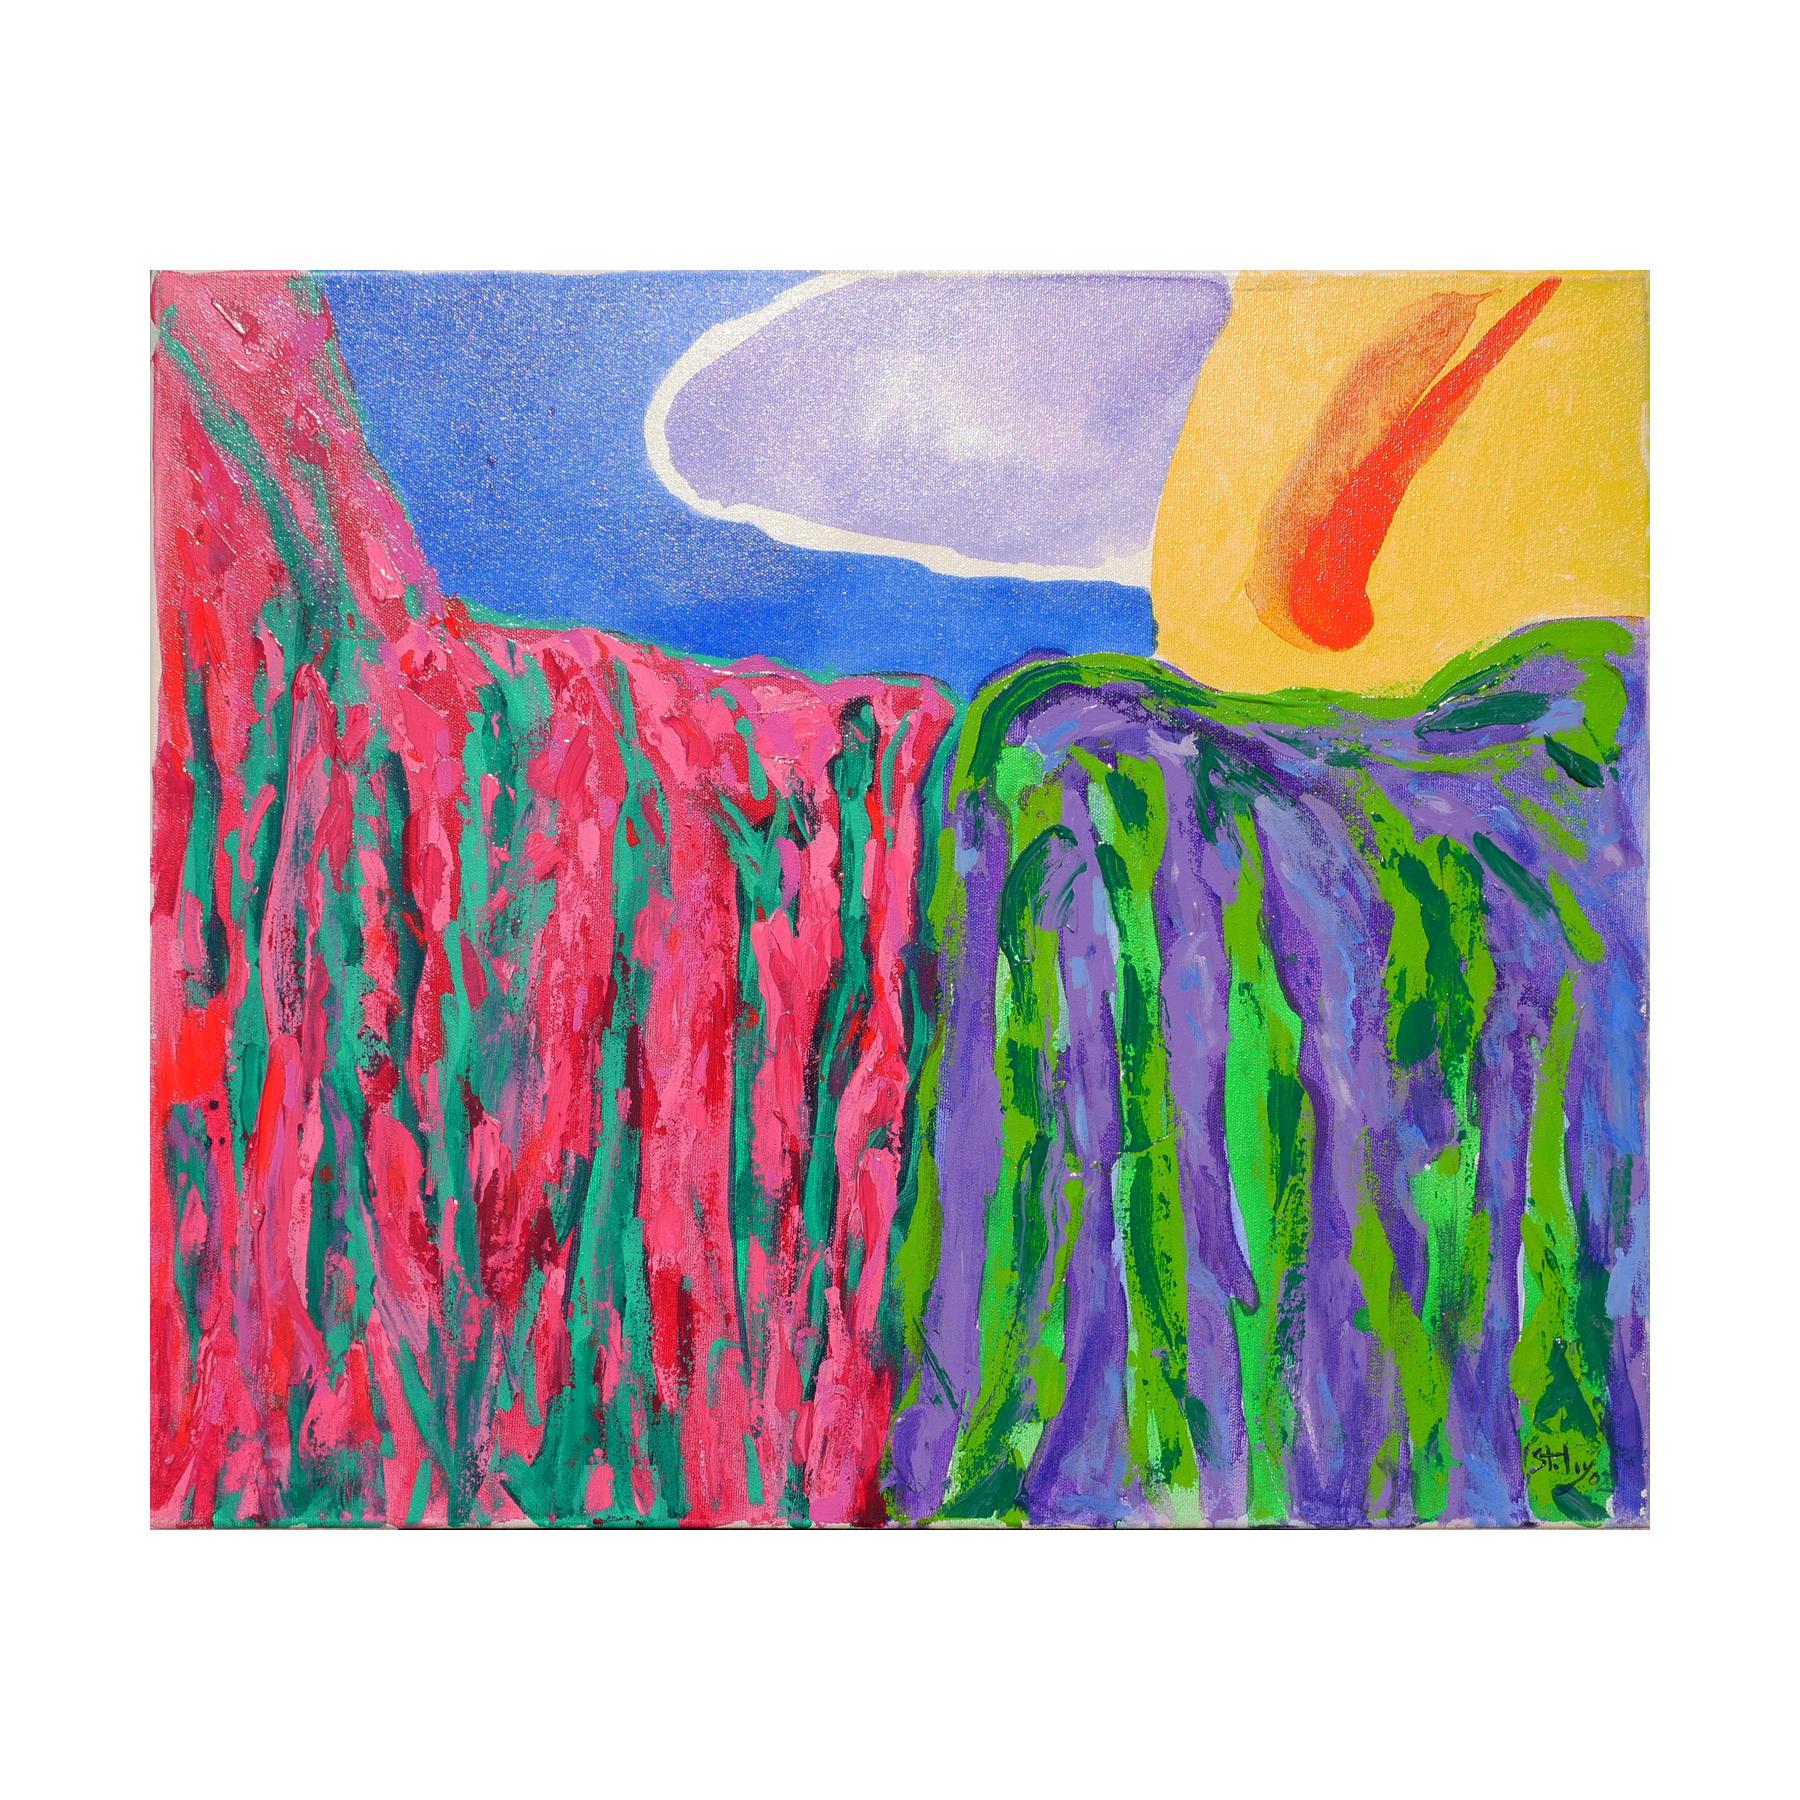 Colorful abstract landscape painting by Houston, TX artist Earl Staley. The painting depicts an abstract rendering of a canyon in pink, purple, and green, with blue skies. The painting also features some patterns and striking colors that add texture